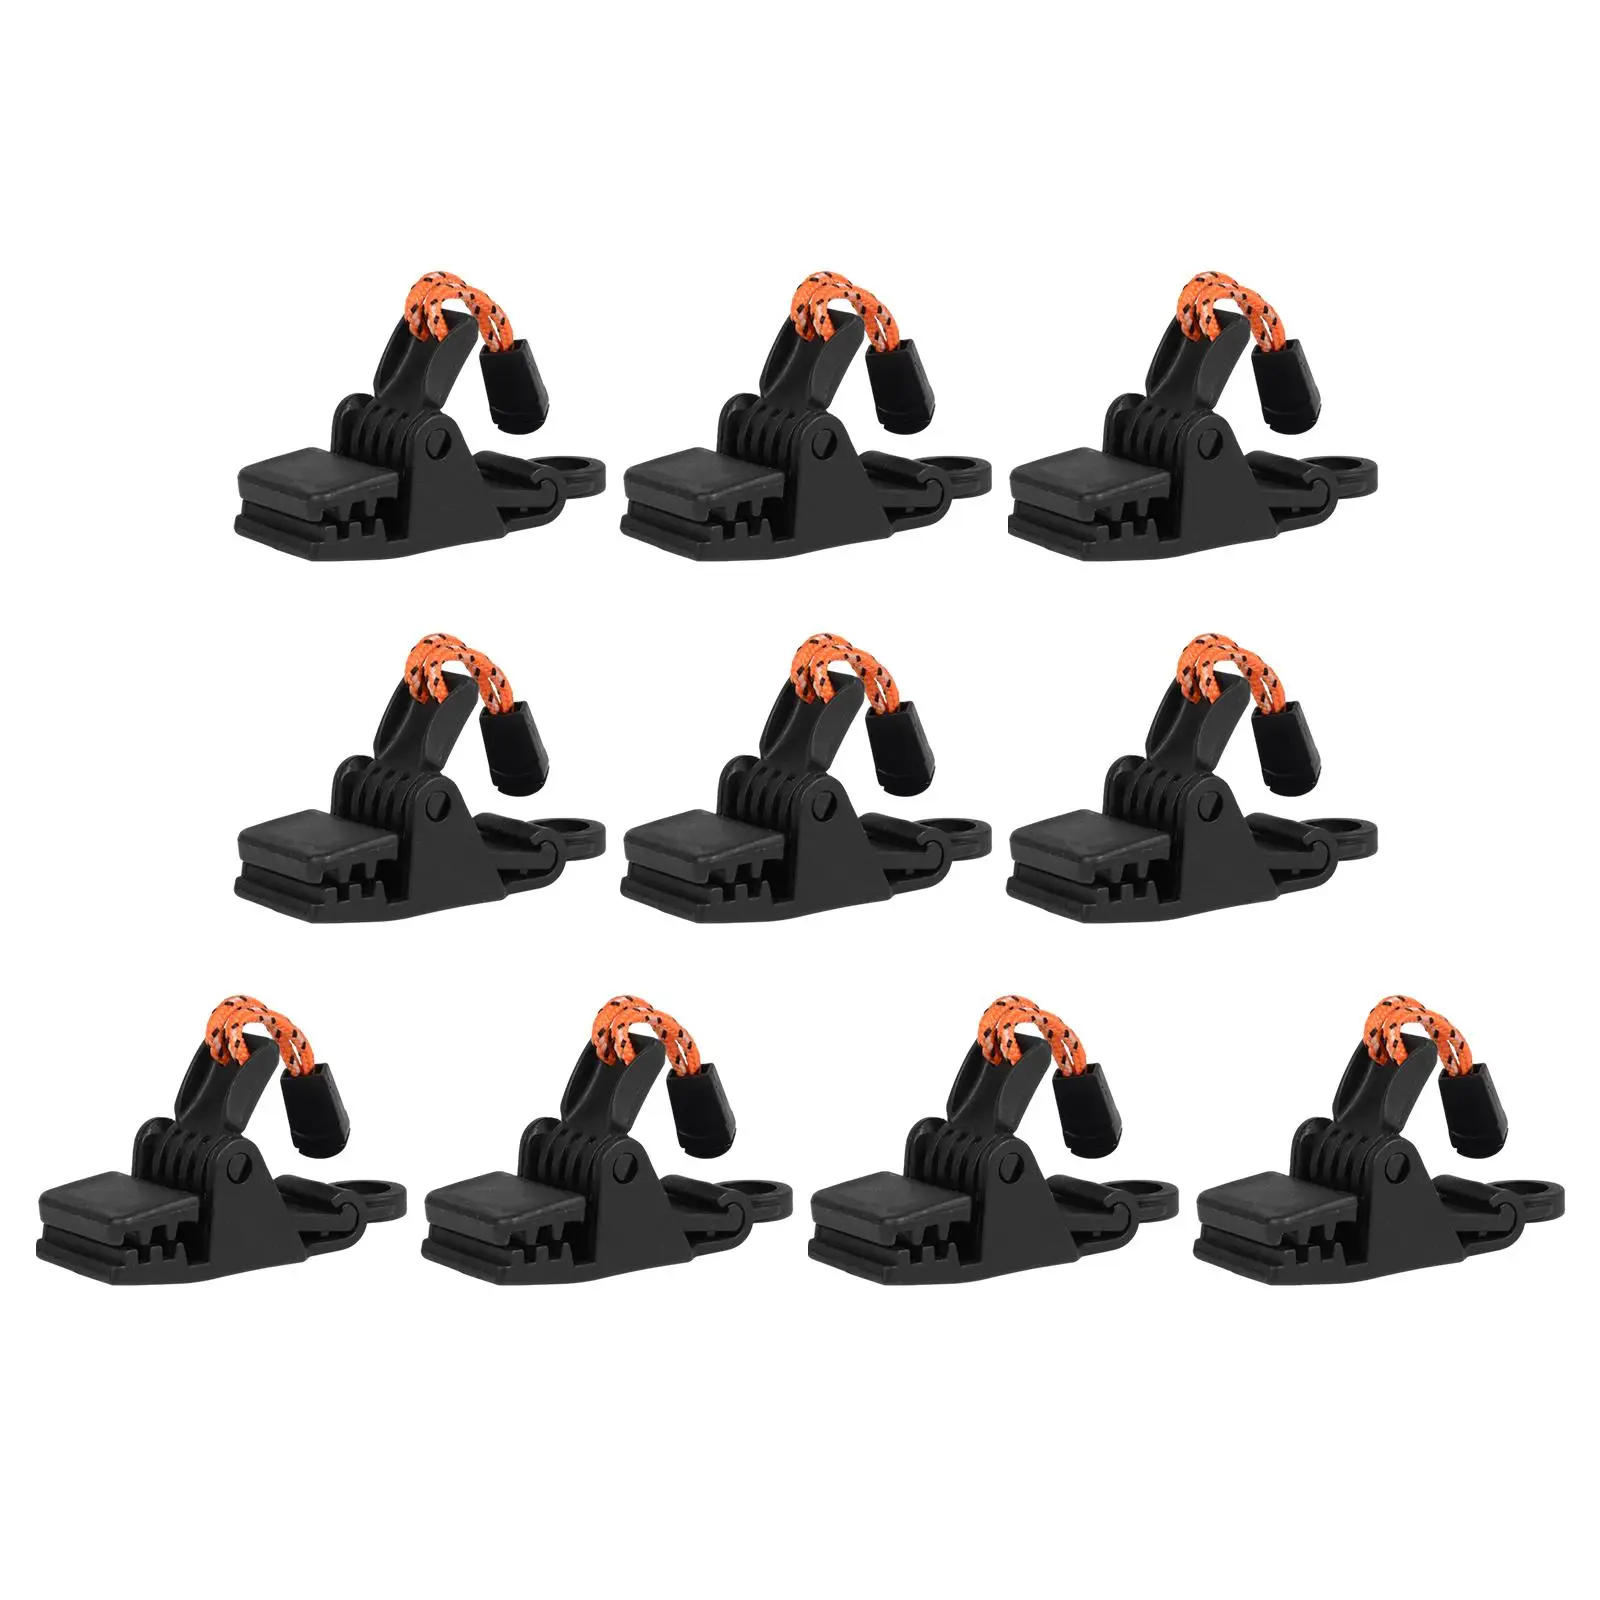 10x Tarp Clips Adjustable Reusable Lightweight Tent Clips Clamp Grip Clamps for Tarps Shade Cloth Fishing Awnings Hiking